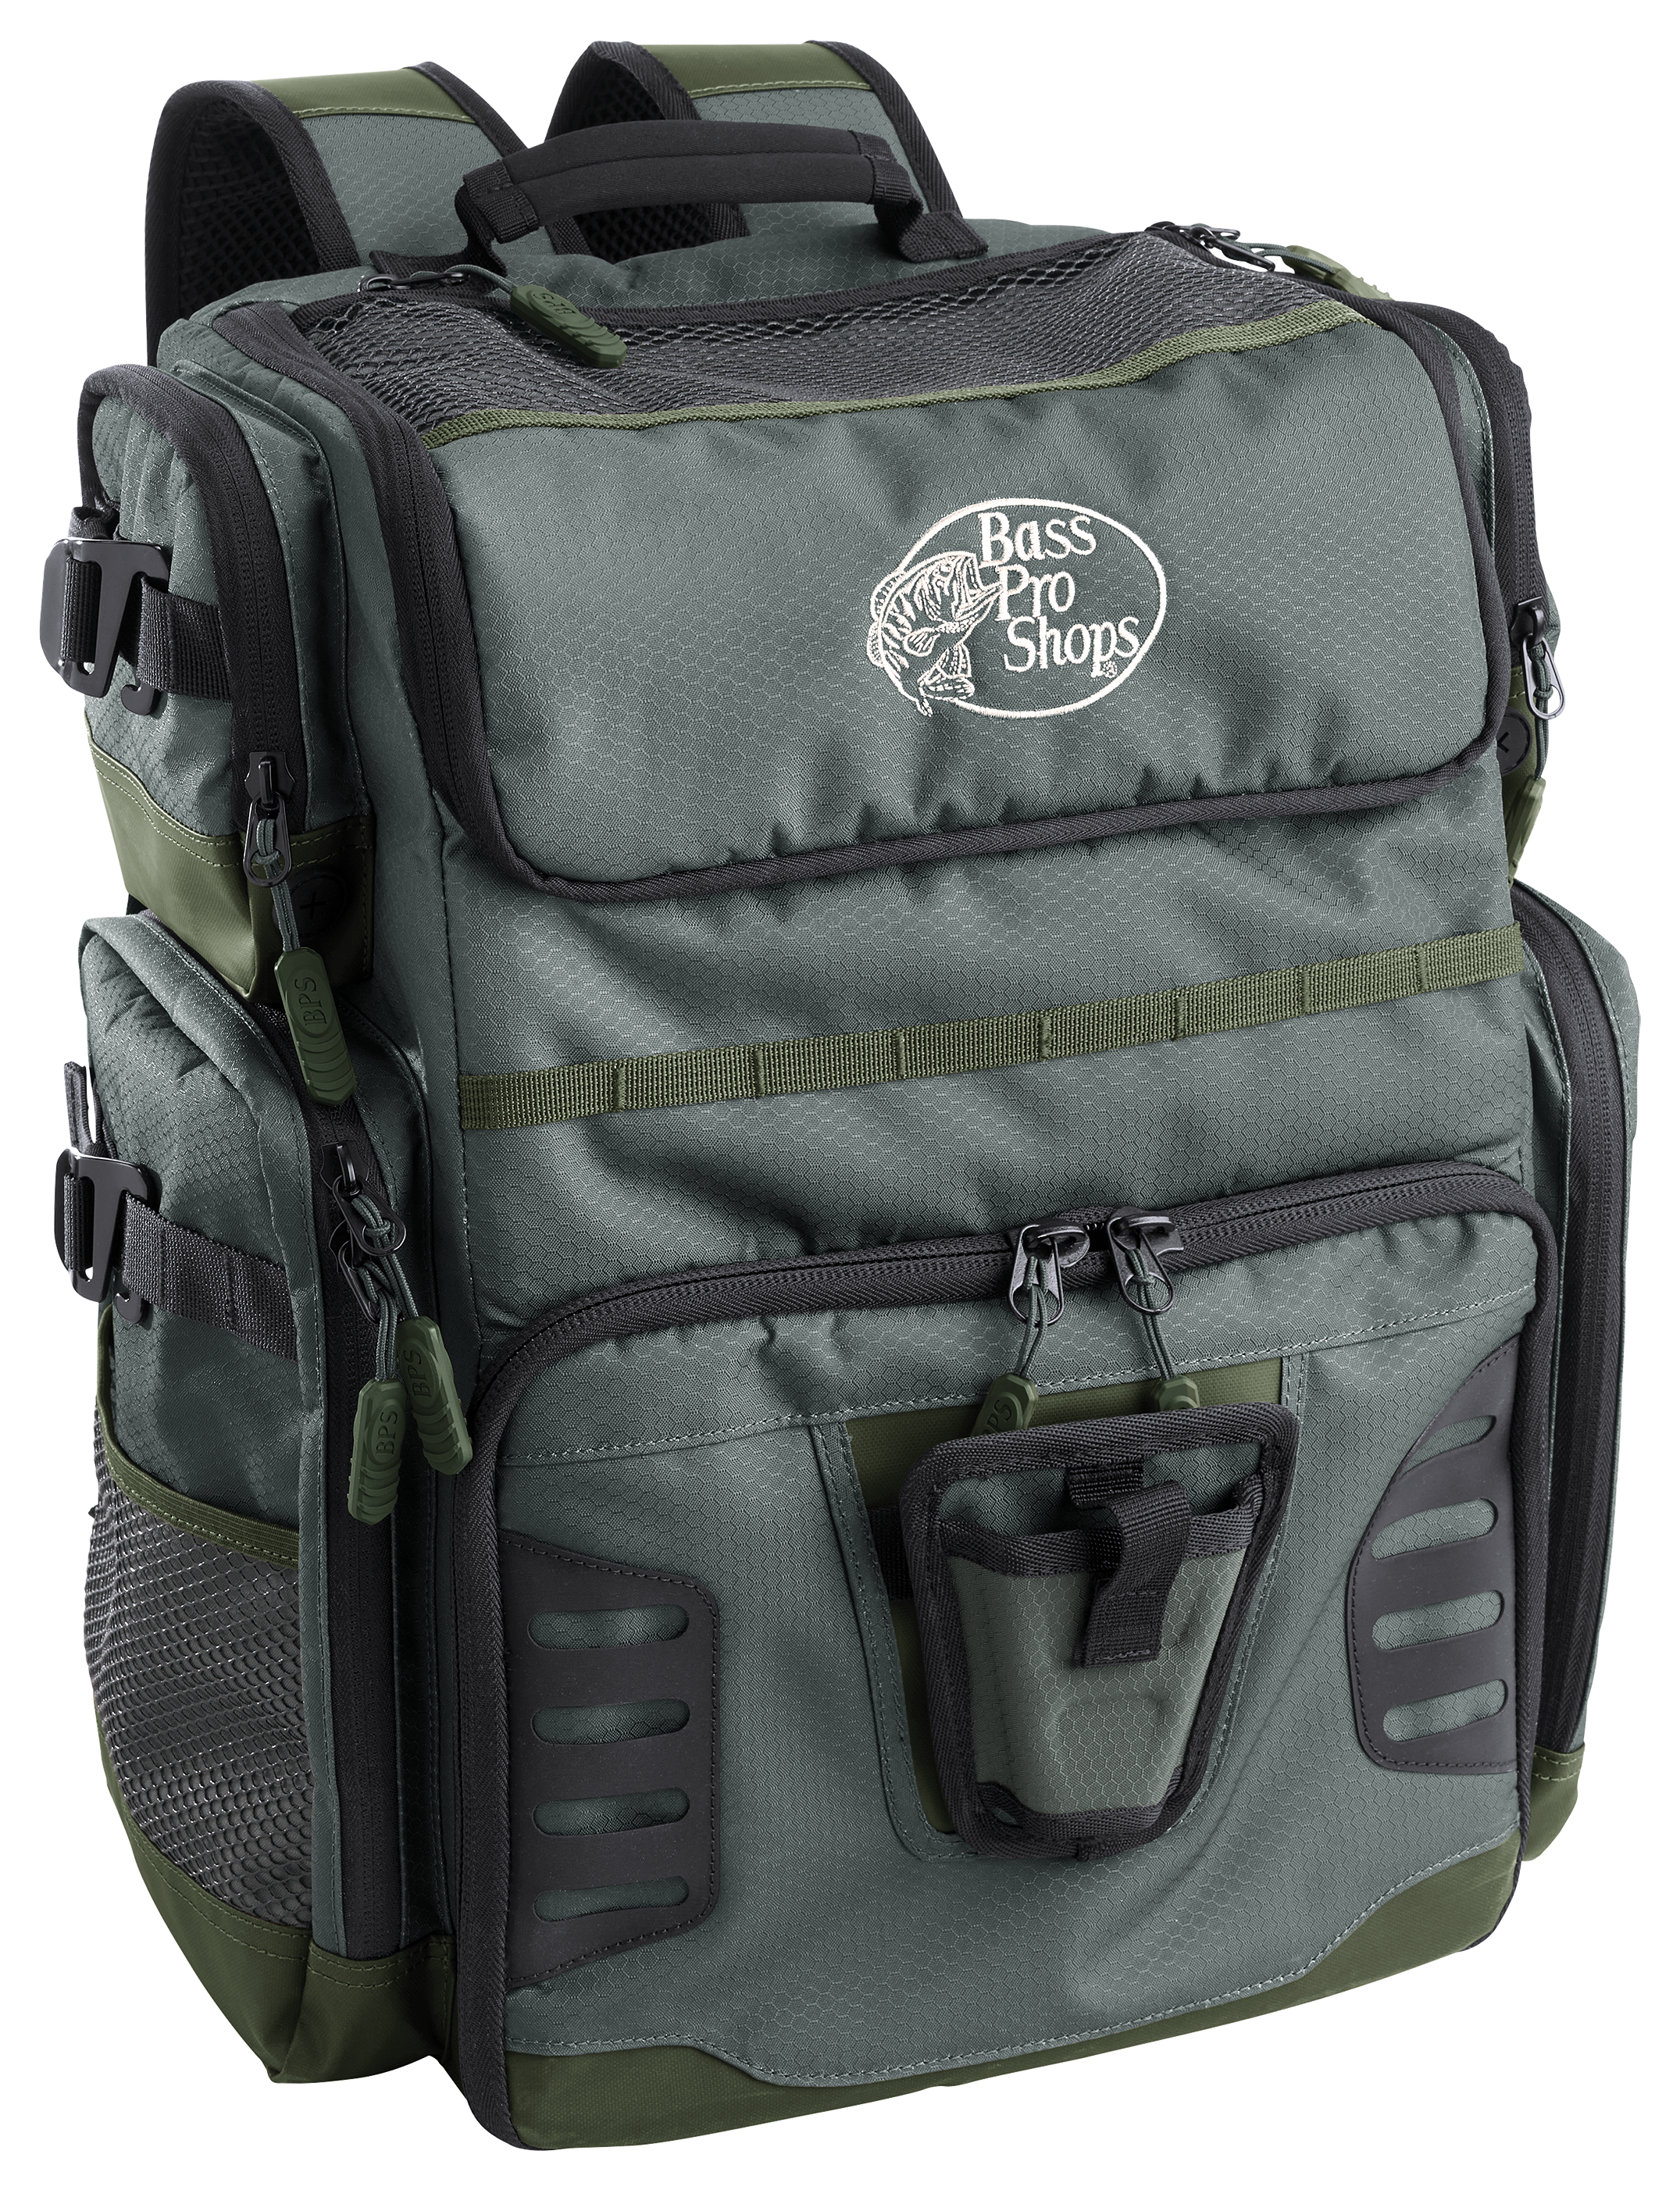 Bass Pro Shops Advanced Angler Pro Backpack Tackle System, 55% OFF